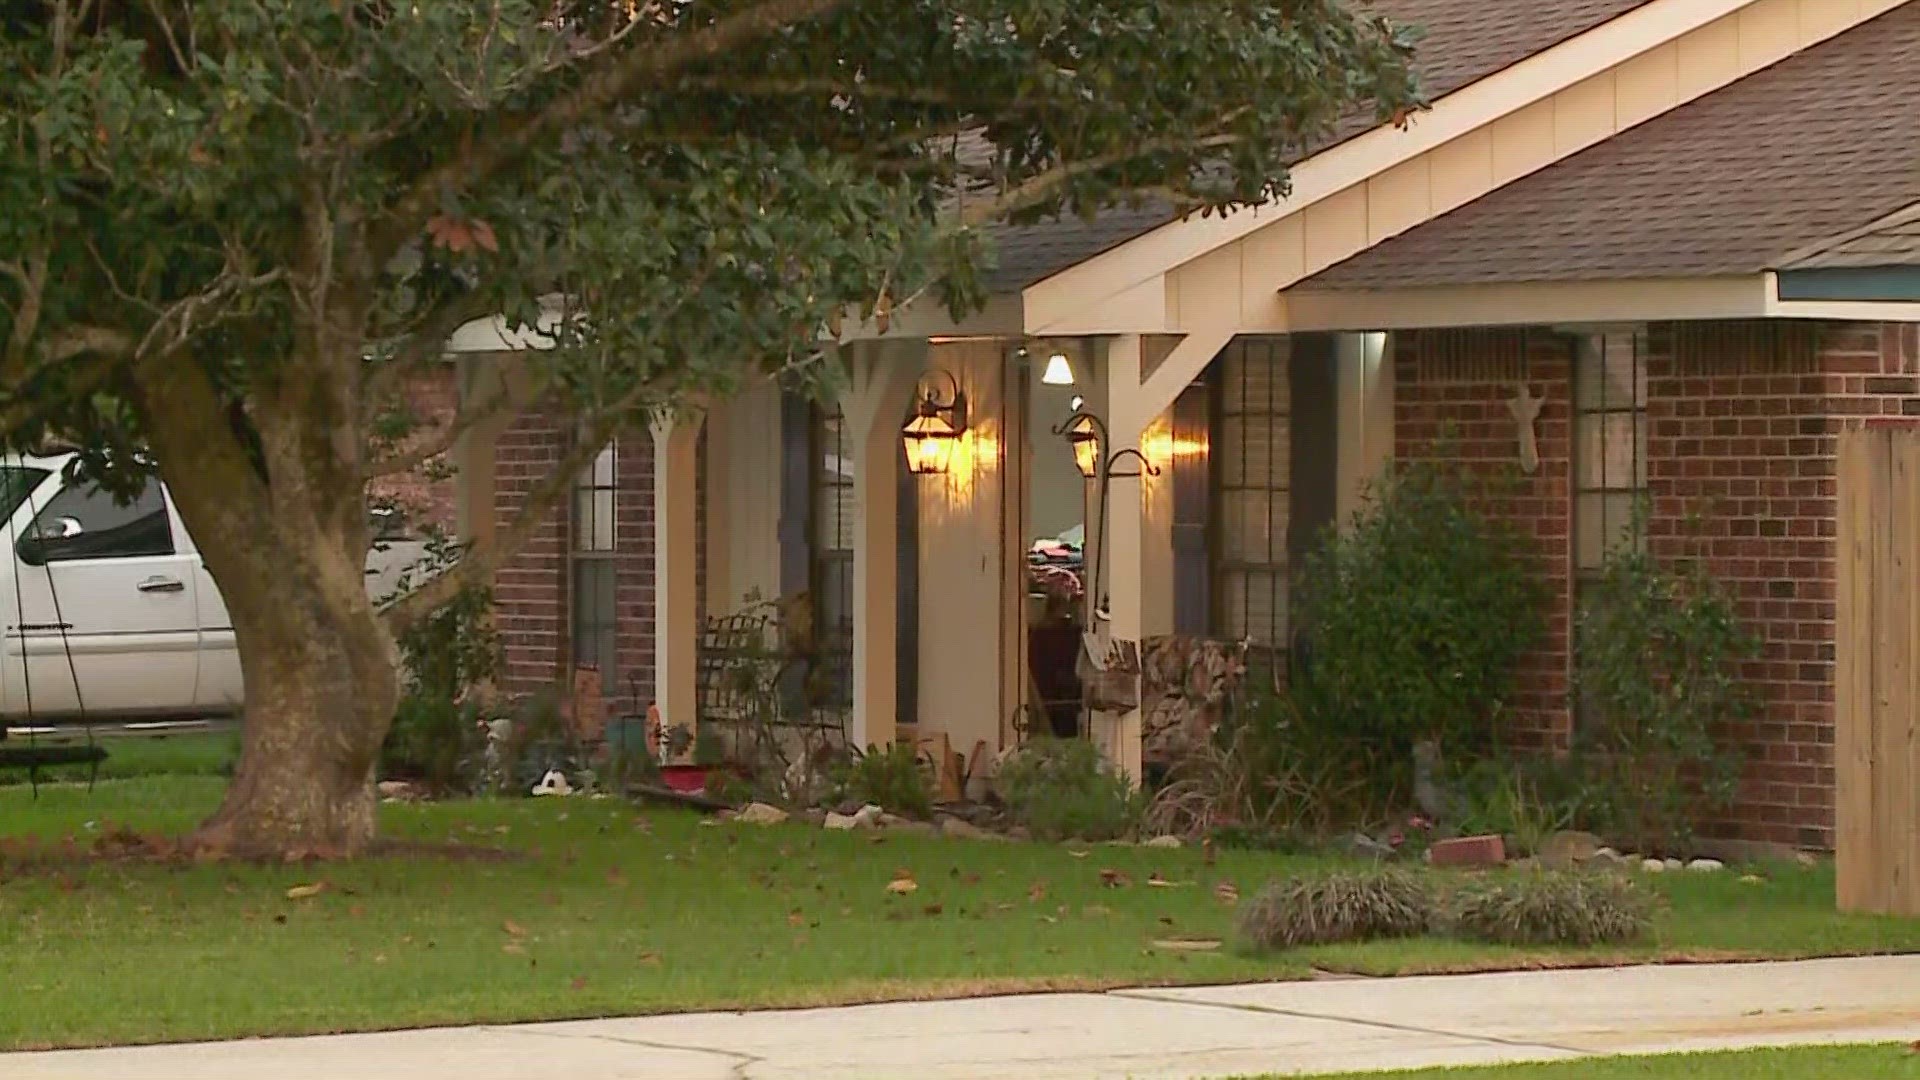 STPSO says two men were found dead inside a Slidell home following a stand-off with SWAT.